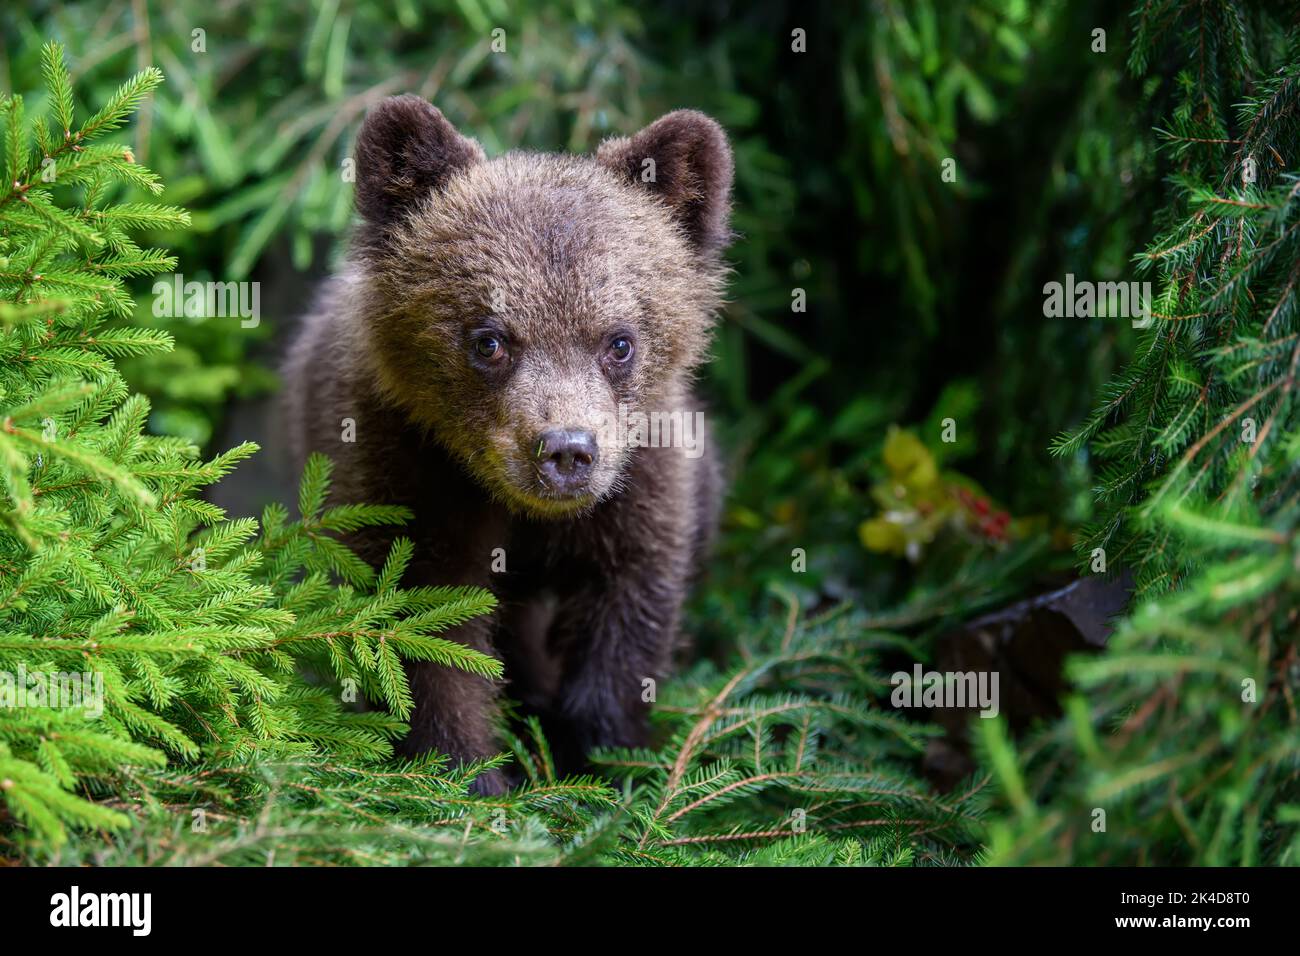 Young brown bear cub in the forest with pine branch. Wild animal in the nature habitat Stock Photo